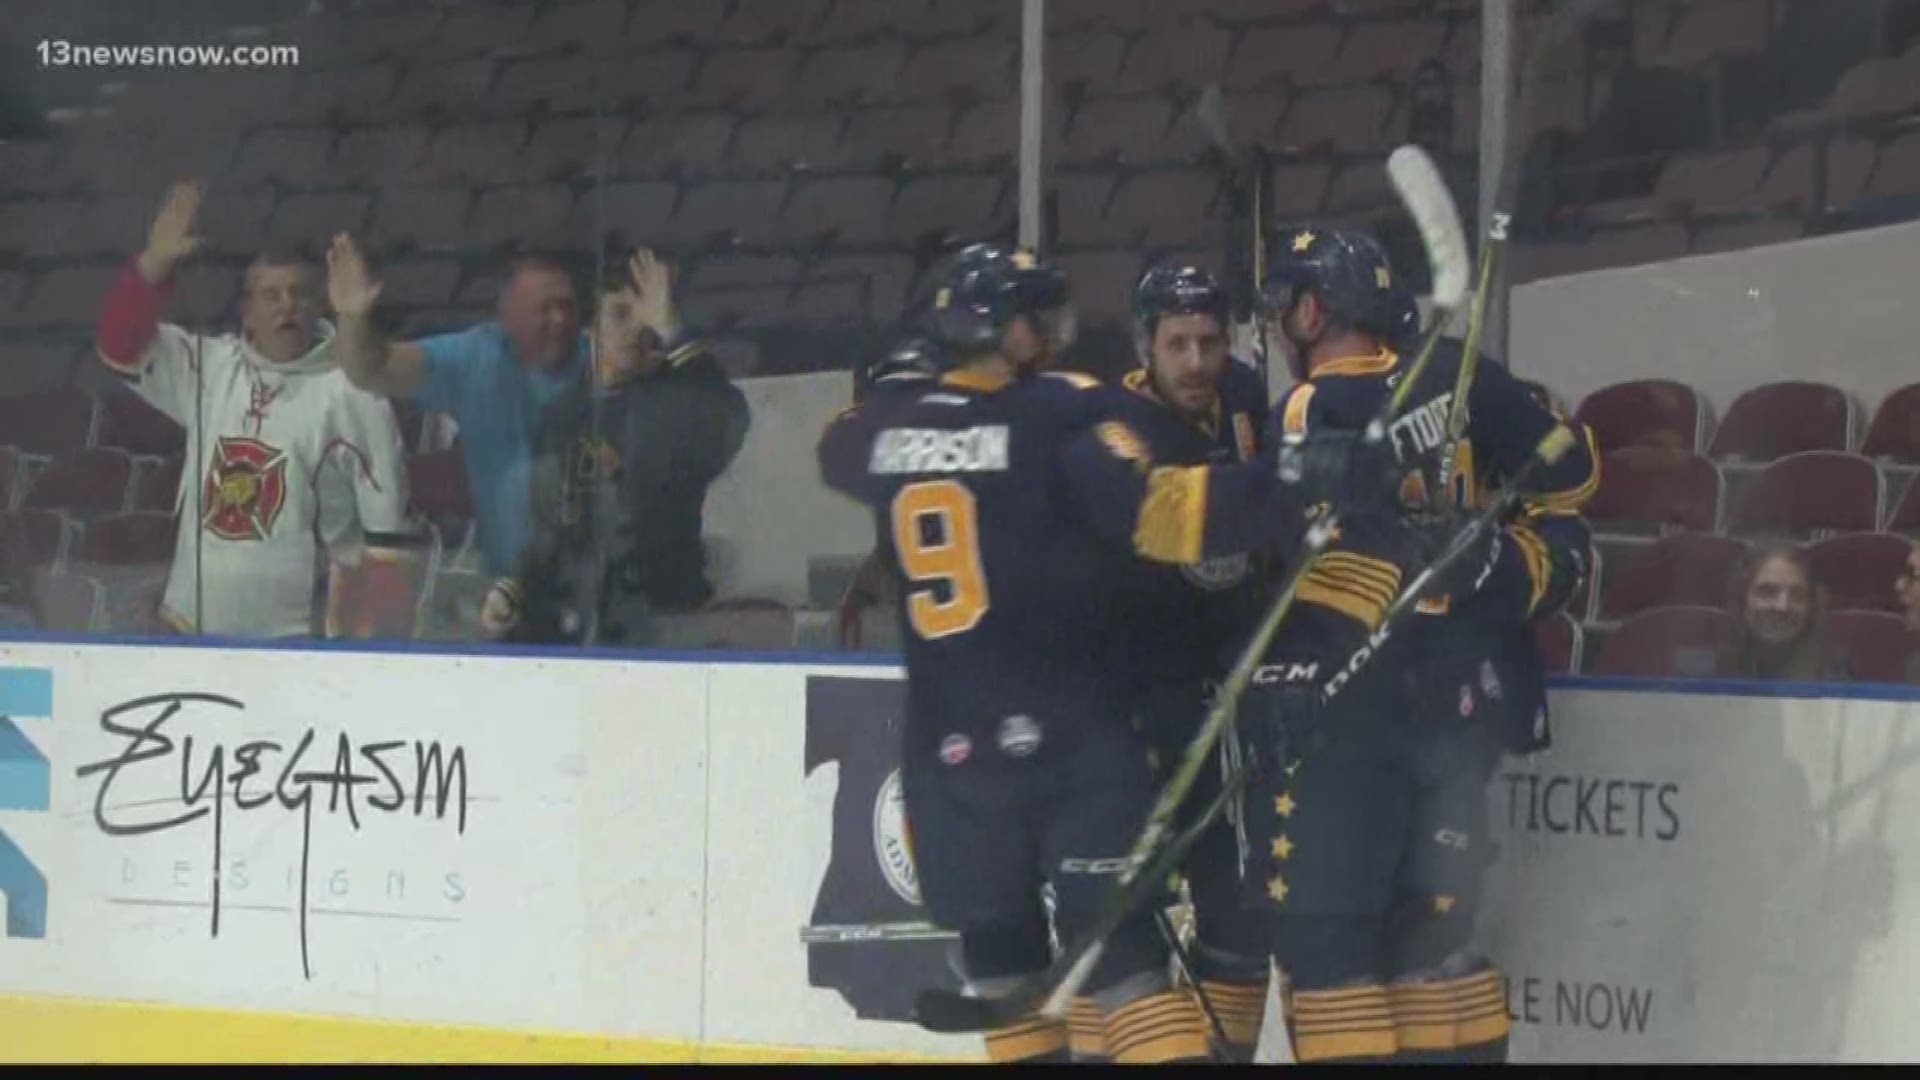 The Admirals closed out their 9 game homestand in style as they came from behind to beat Jacksonville 5-4 in overtime.